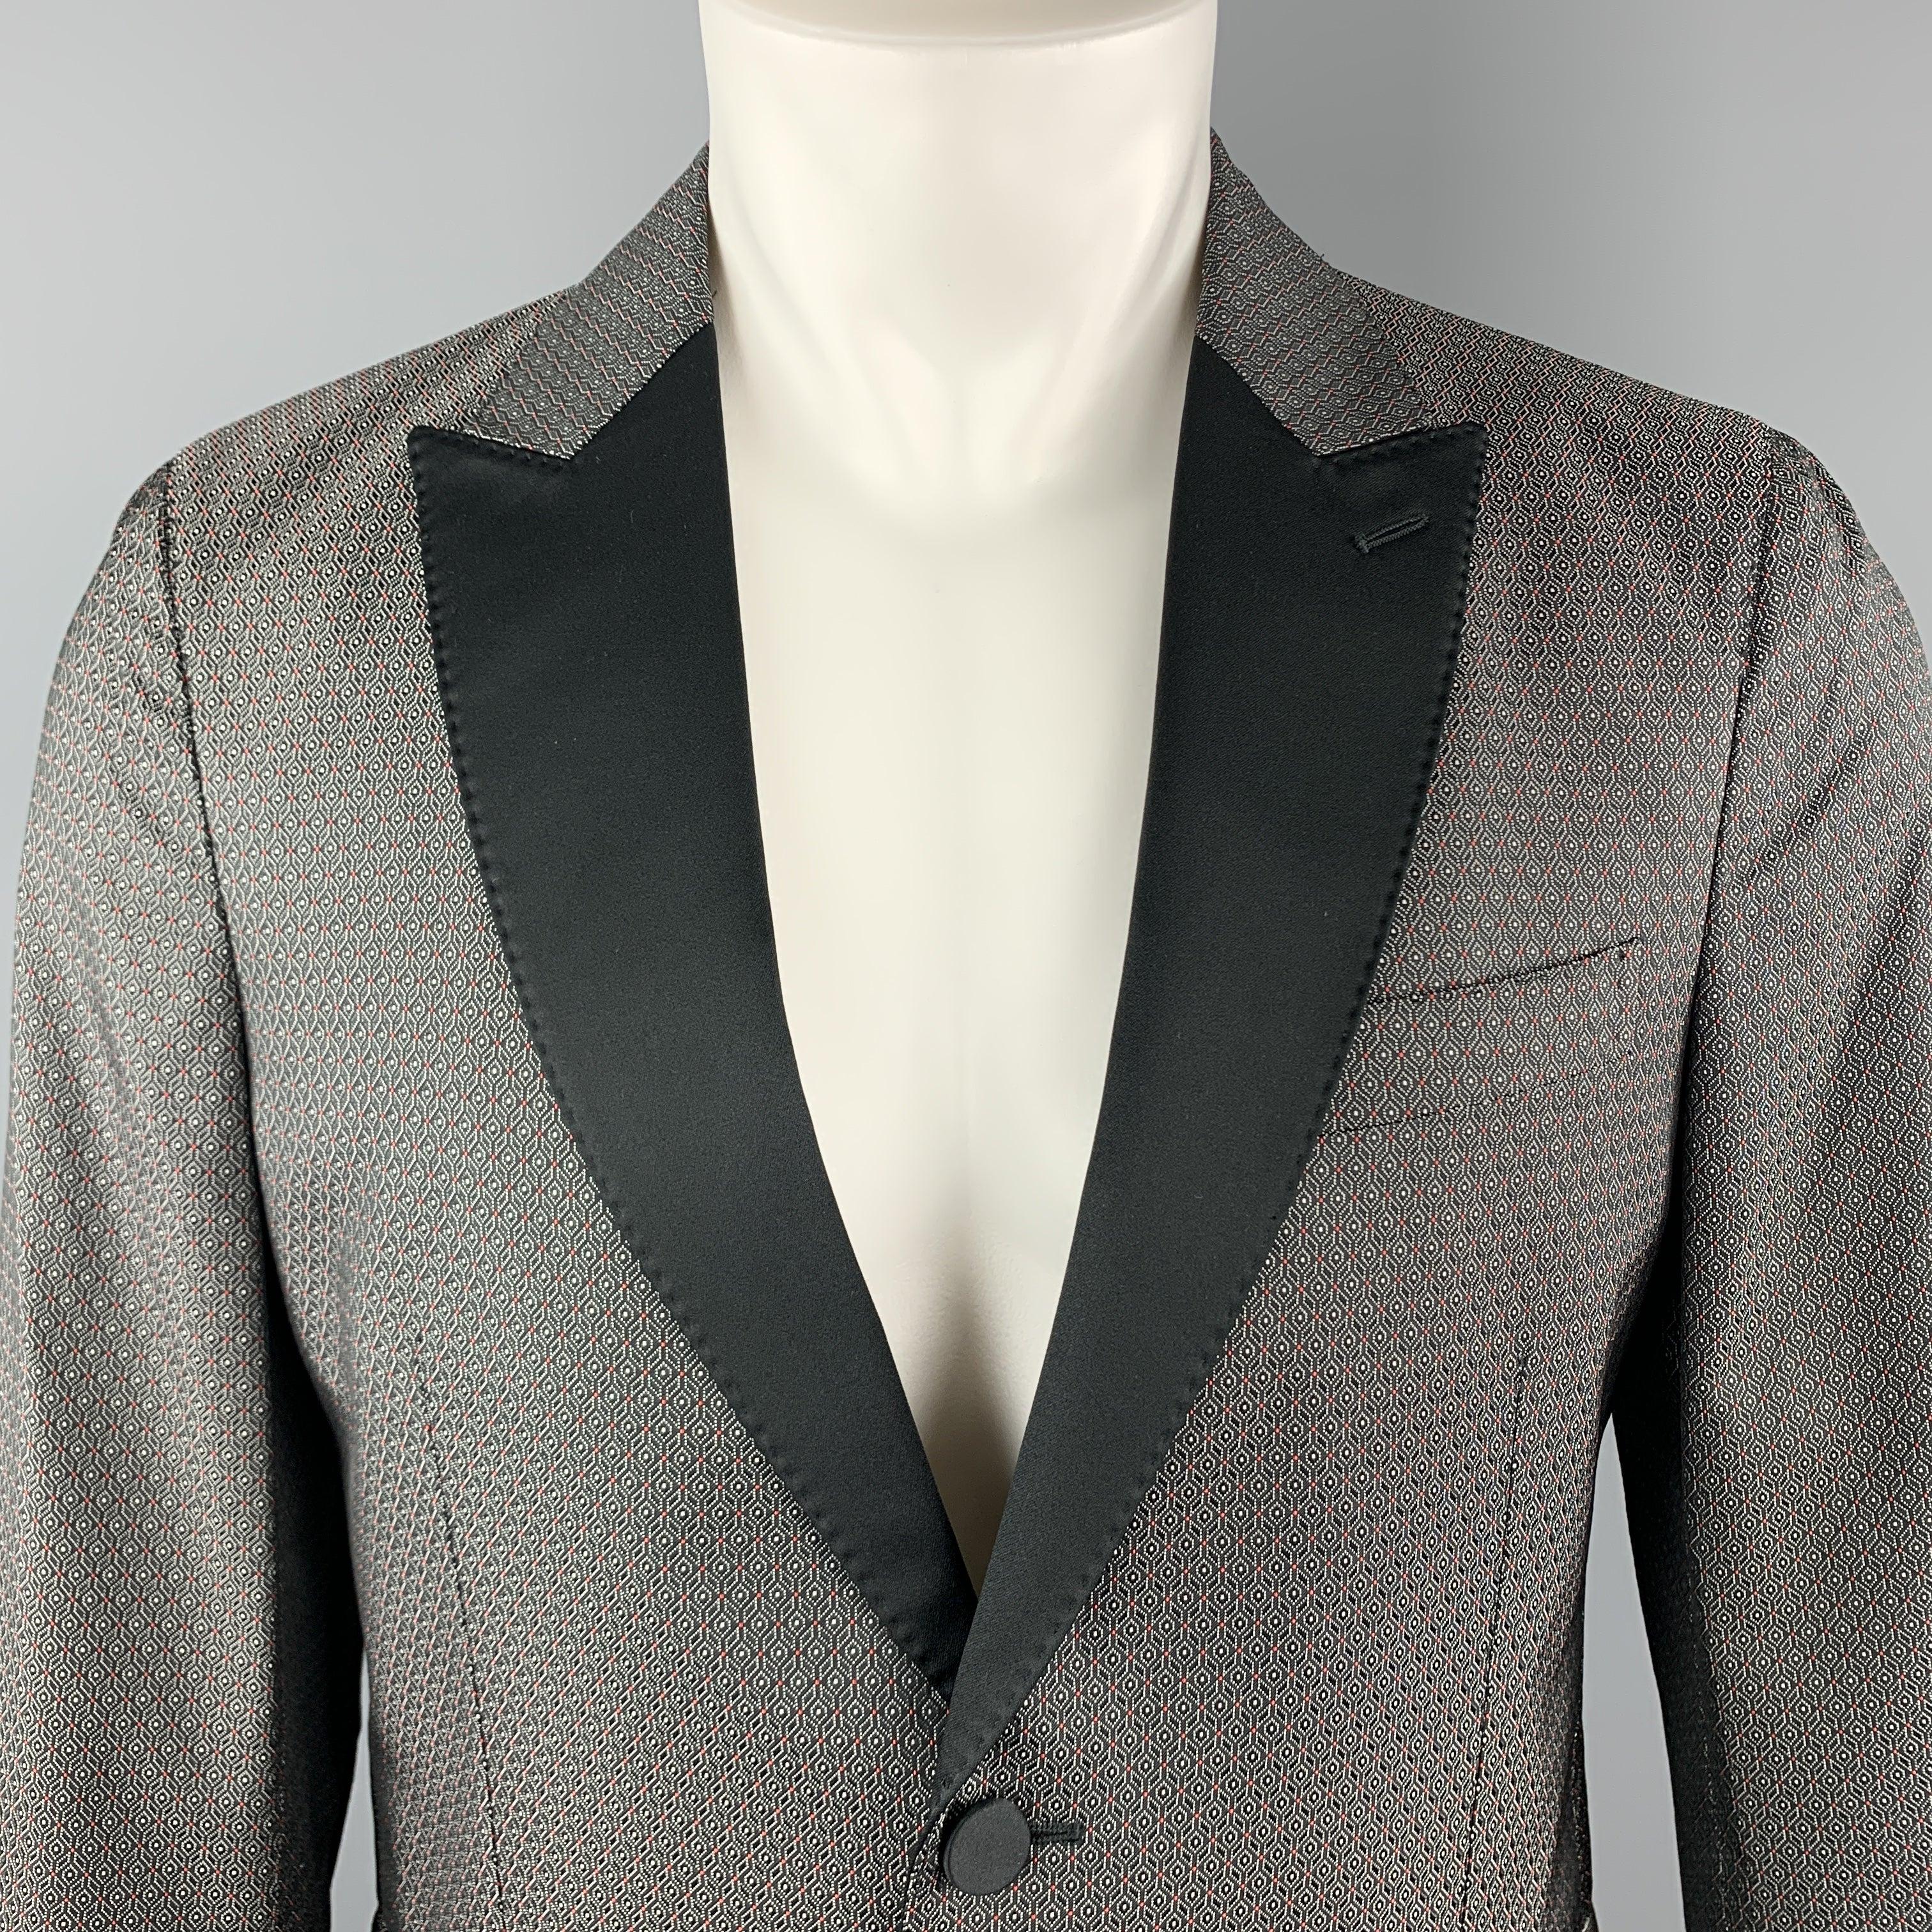 VALENTINO Tuxedo Sport Coat
comes in gray and black jacquard polyester / silk material, with a peak lapel, slit and flap pockets, single breasted, two buttons at closure, buttoned cuffs, and a single vent at back. Made in Italy.
Excellent Pre-Owned